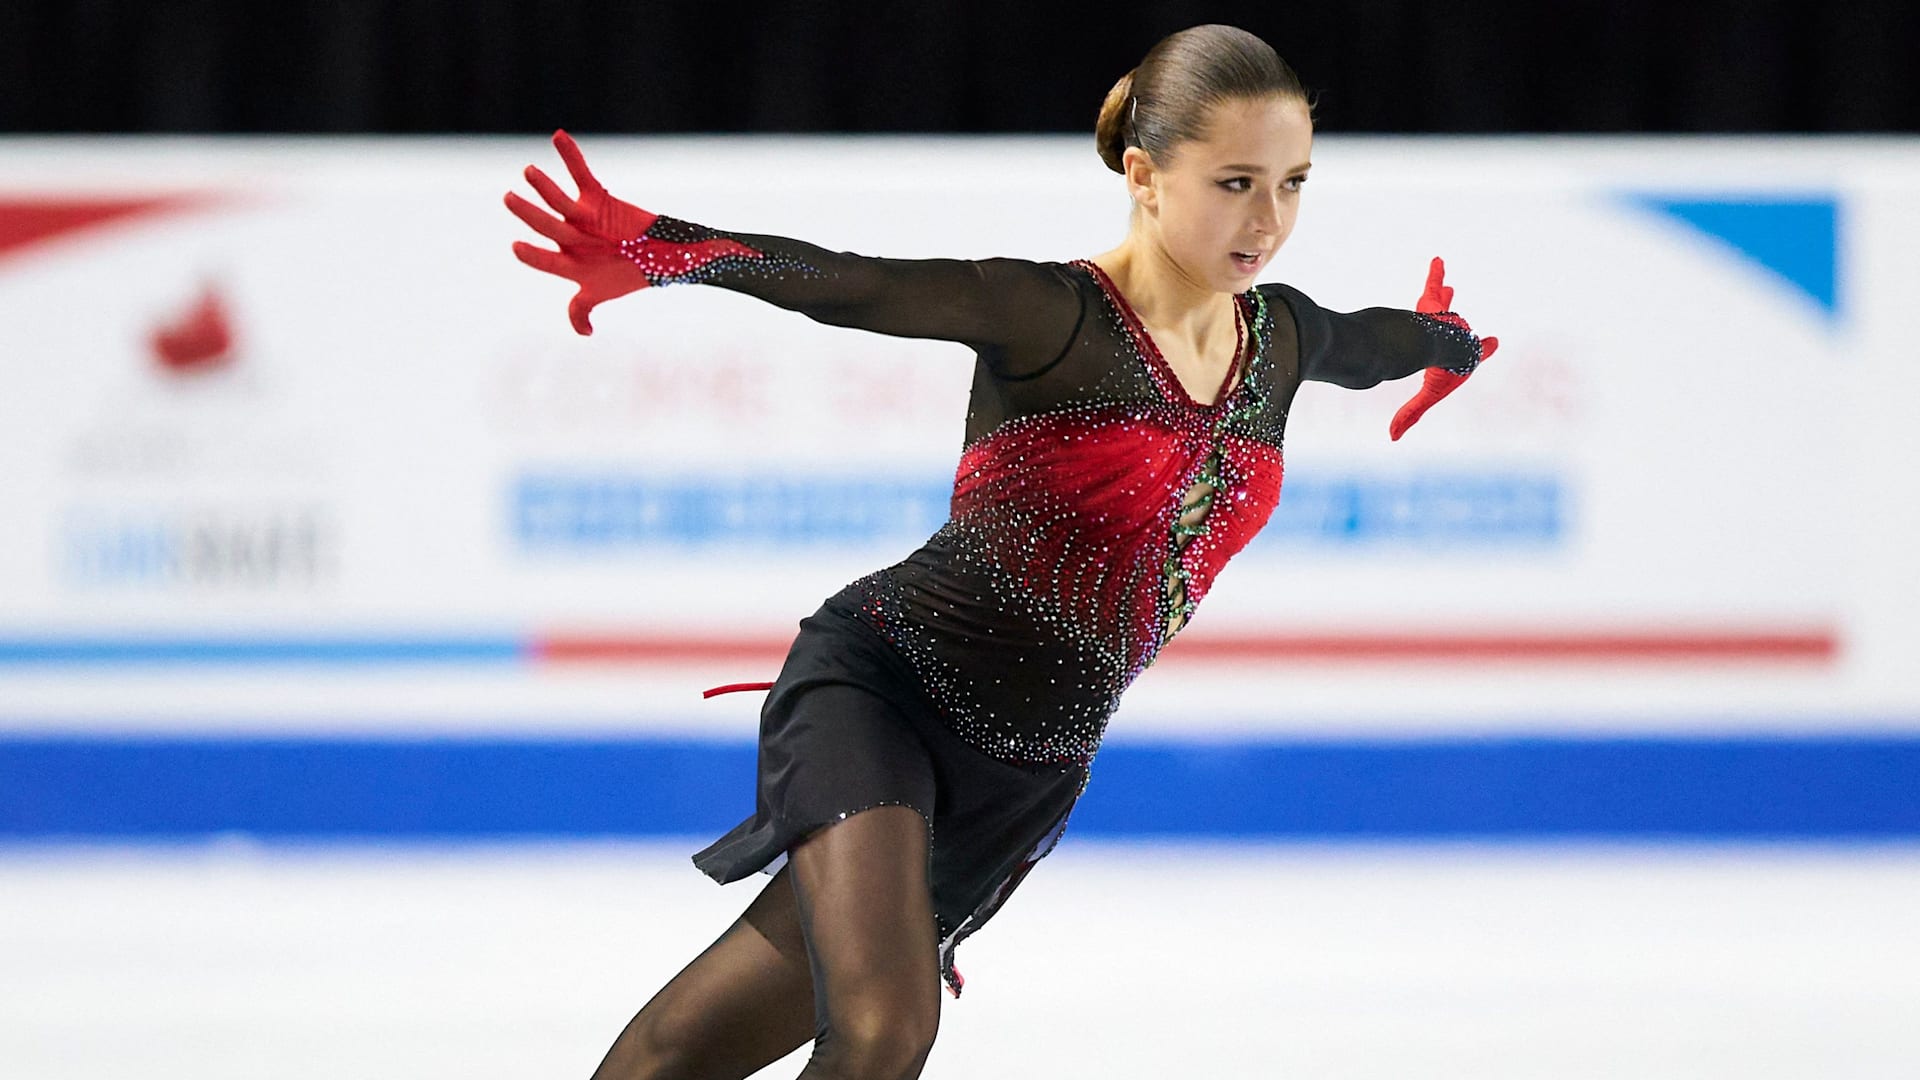 ROC announces Olympic figure skating team for Beijing 2022 including Valieva